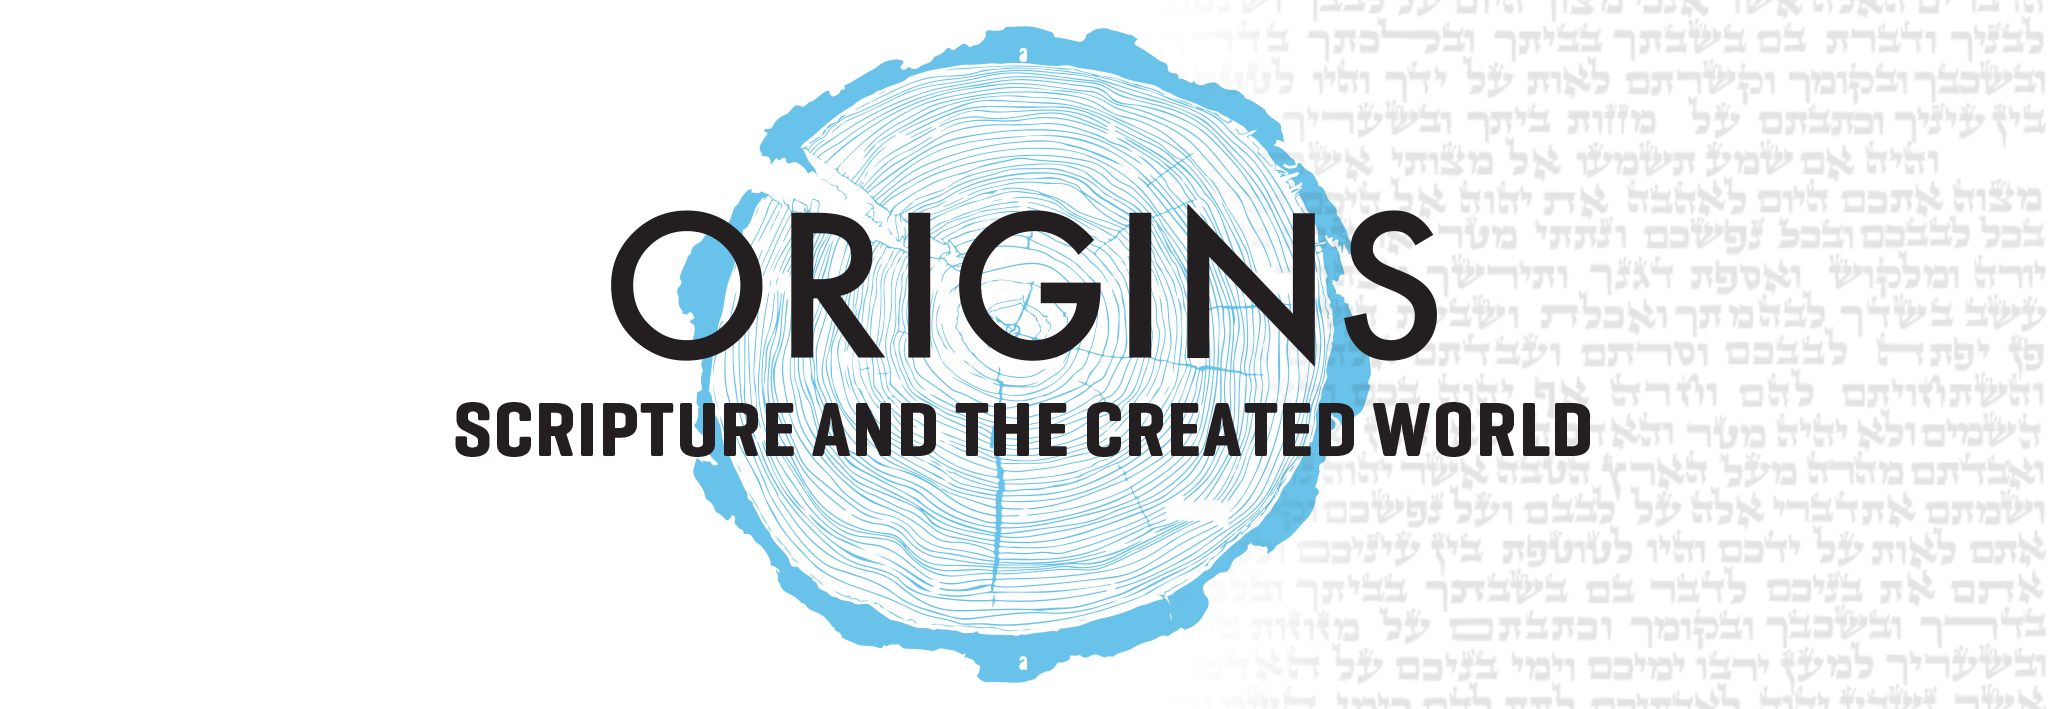 Artwork for series, Origins - Scripture and the Created World